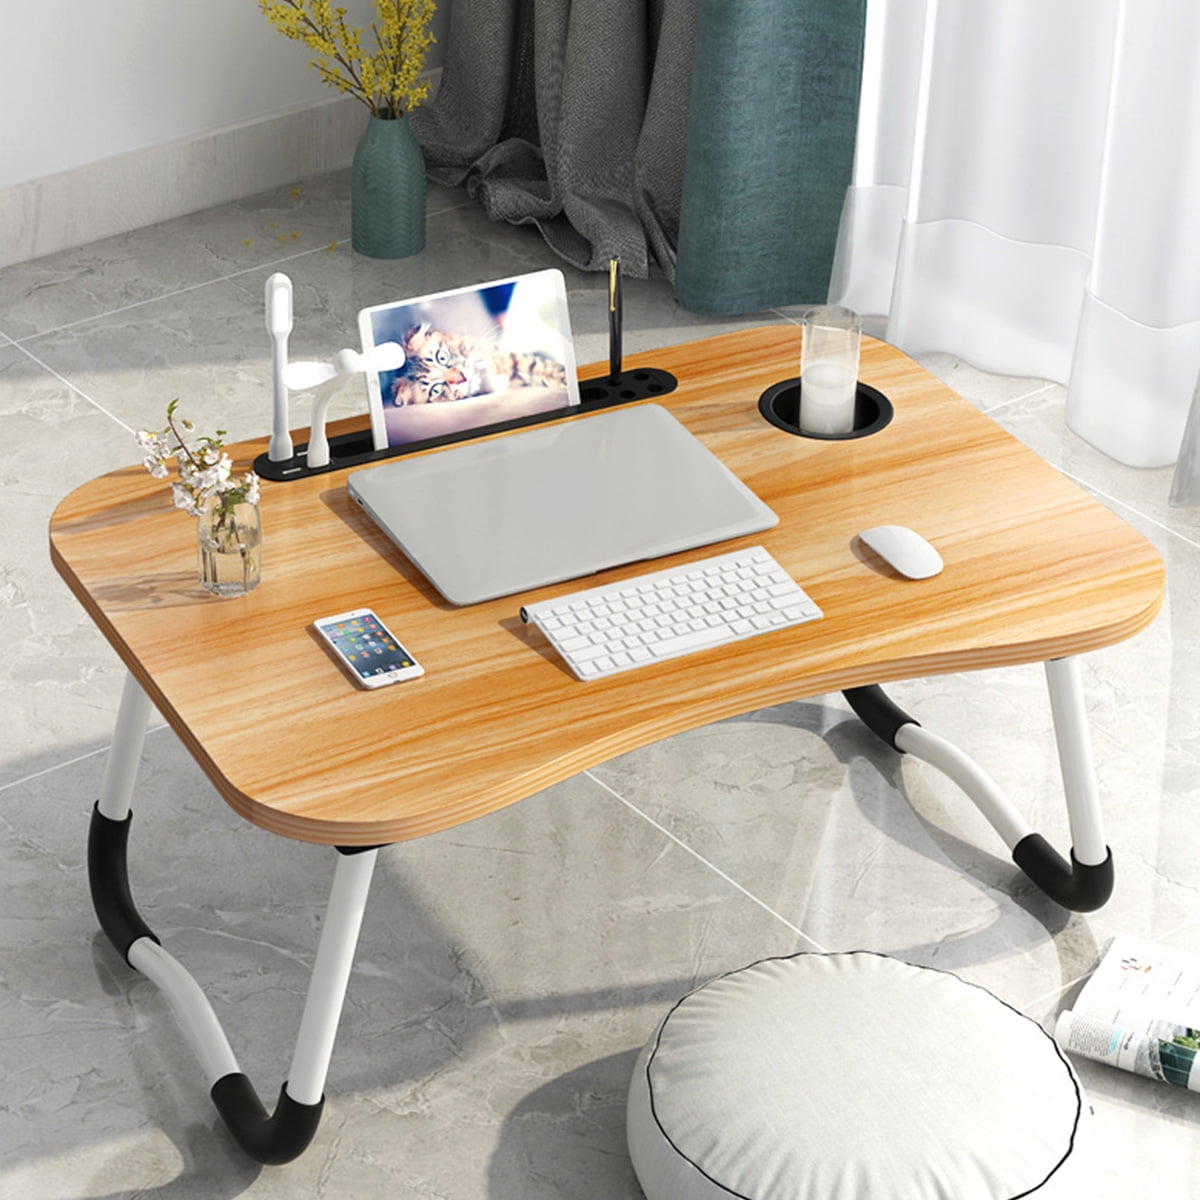 Portable Folding Lap Desk Computer Laptop Breakfast Tray Bed Couch Table Stand 